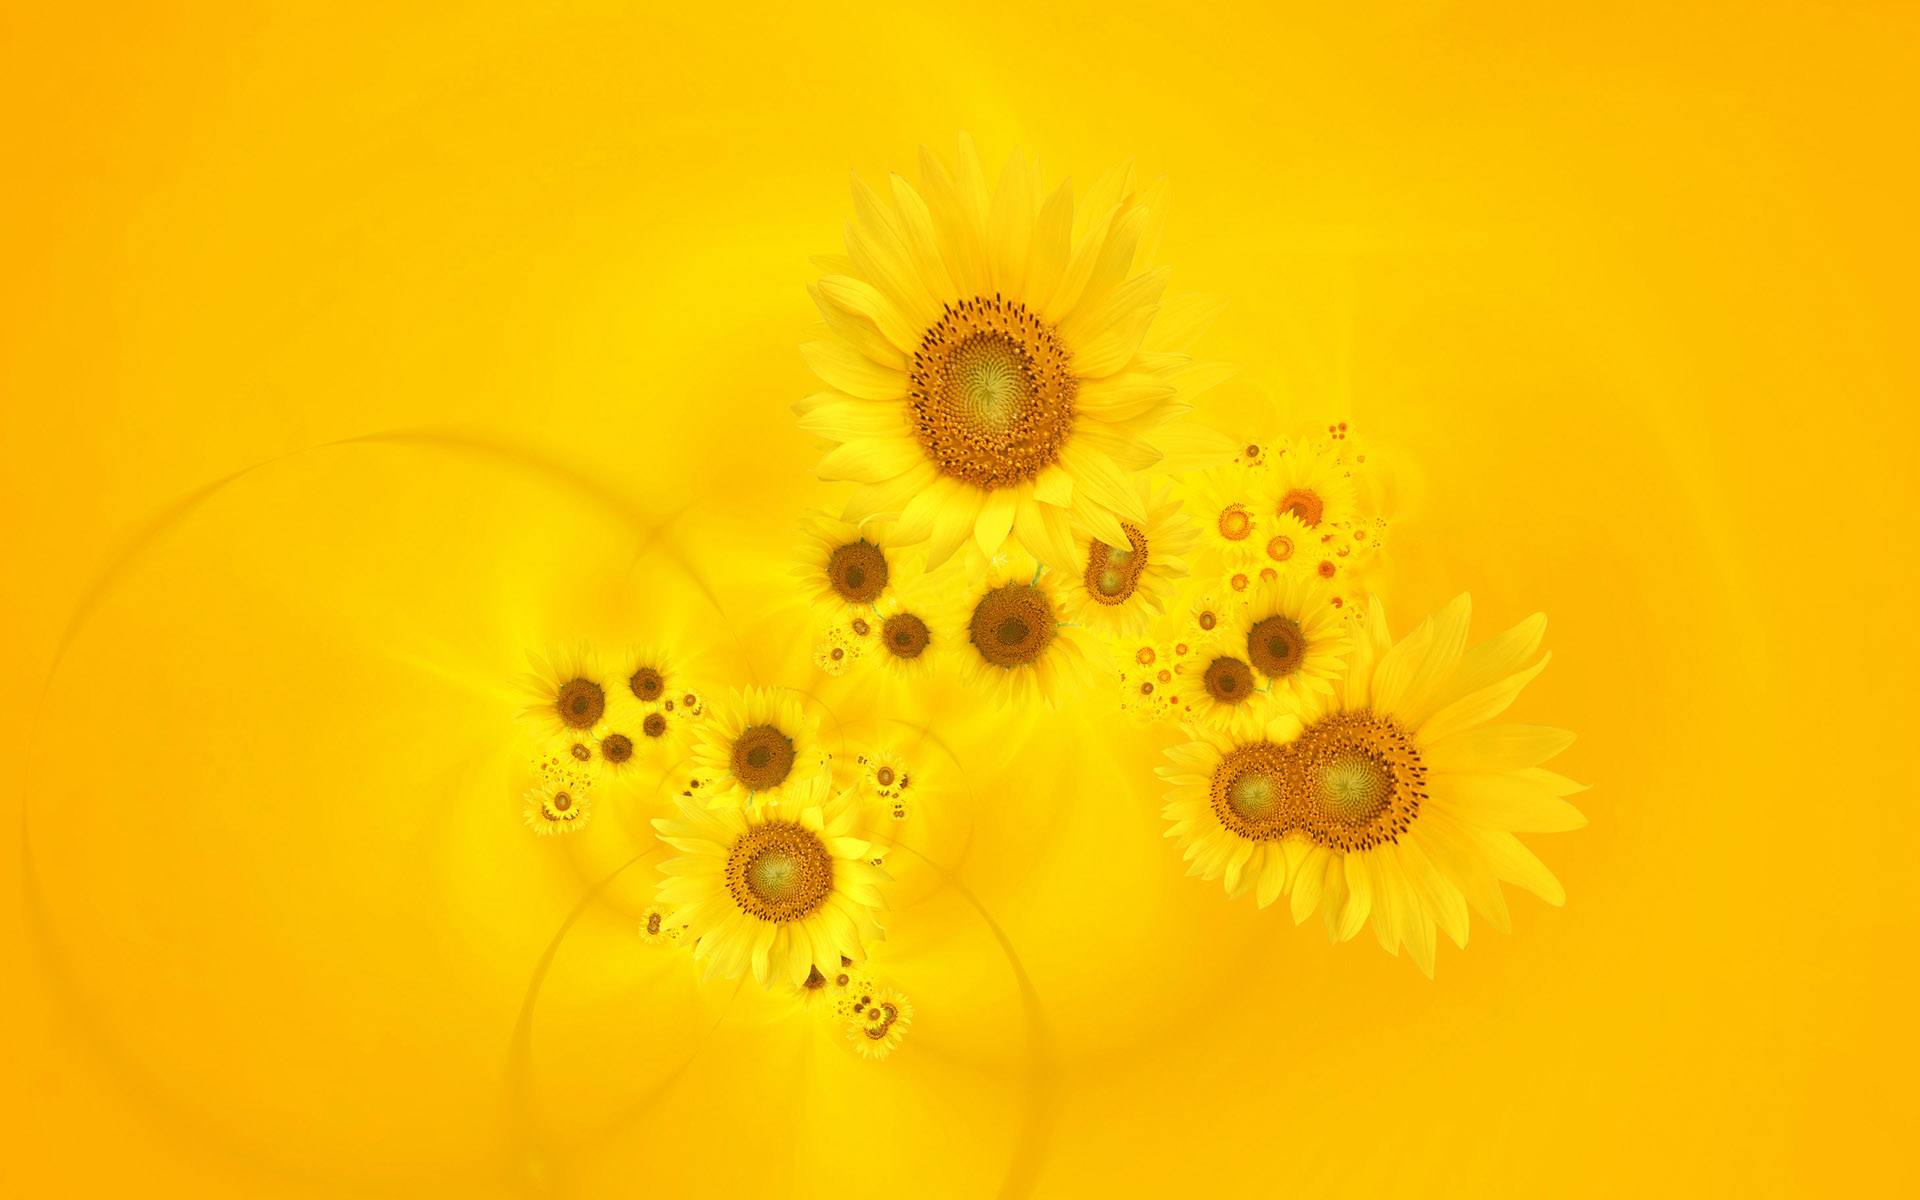 This Is A Wallpaper Of Sunflowers With The Yellow Background There Are